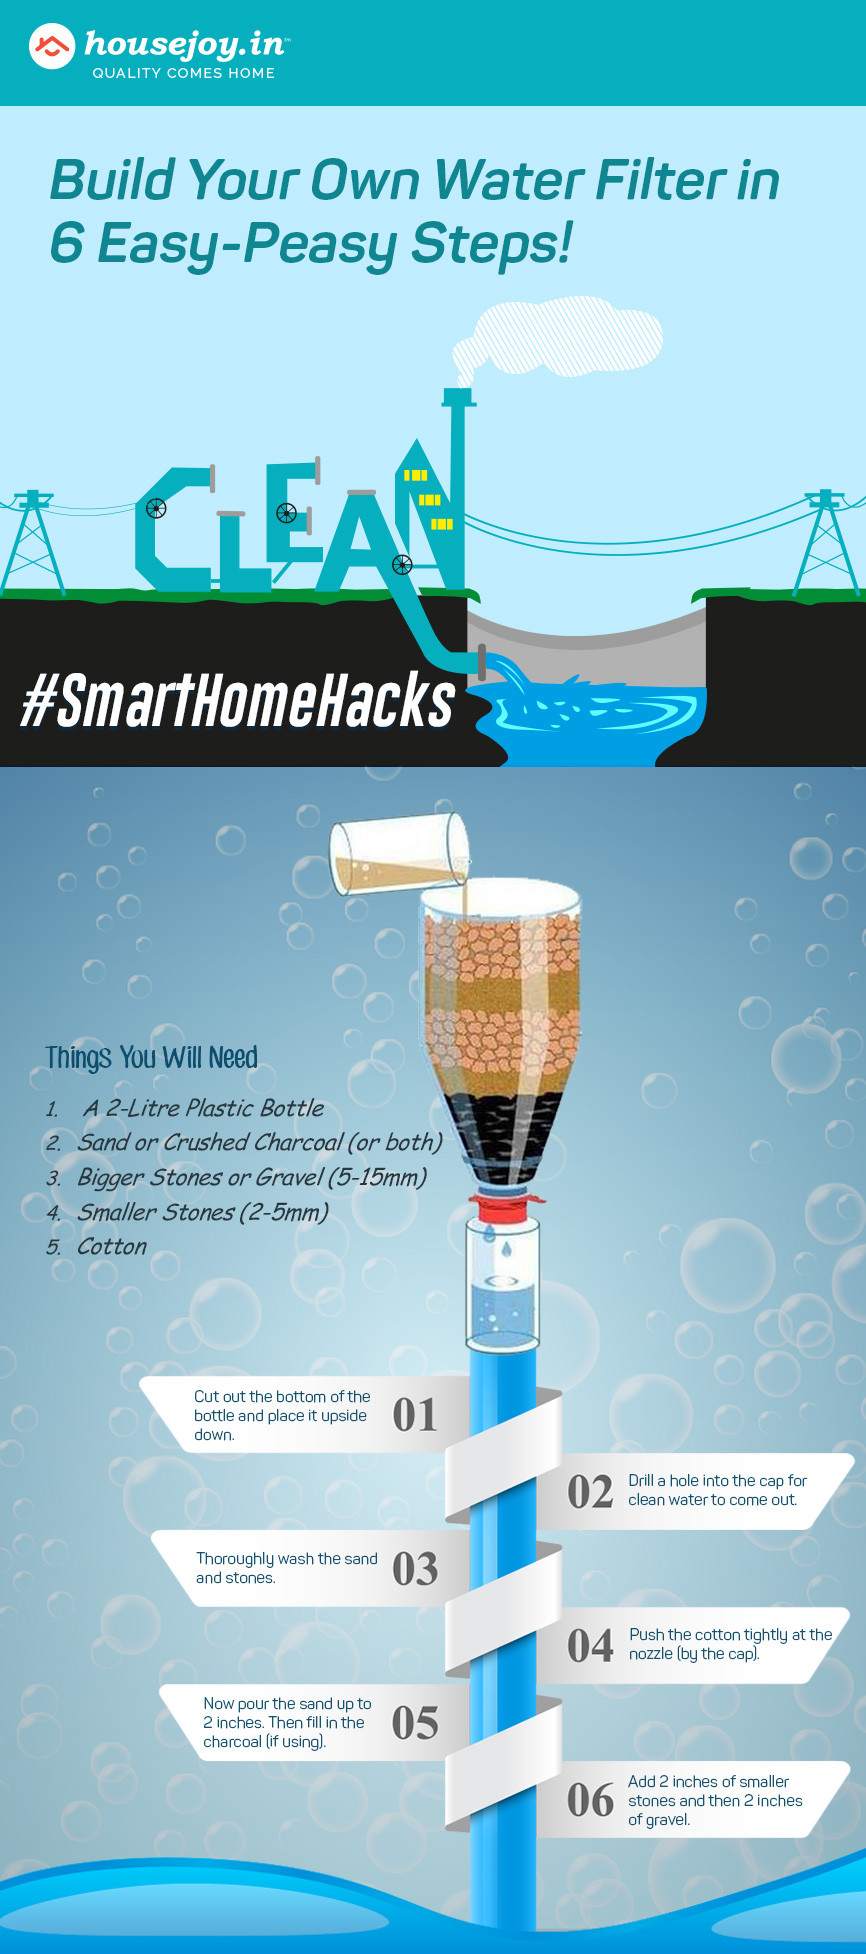 DIY Water Filtration Systems Home
 Build Your Own DIY Water Filter in 6 Clever Steps